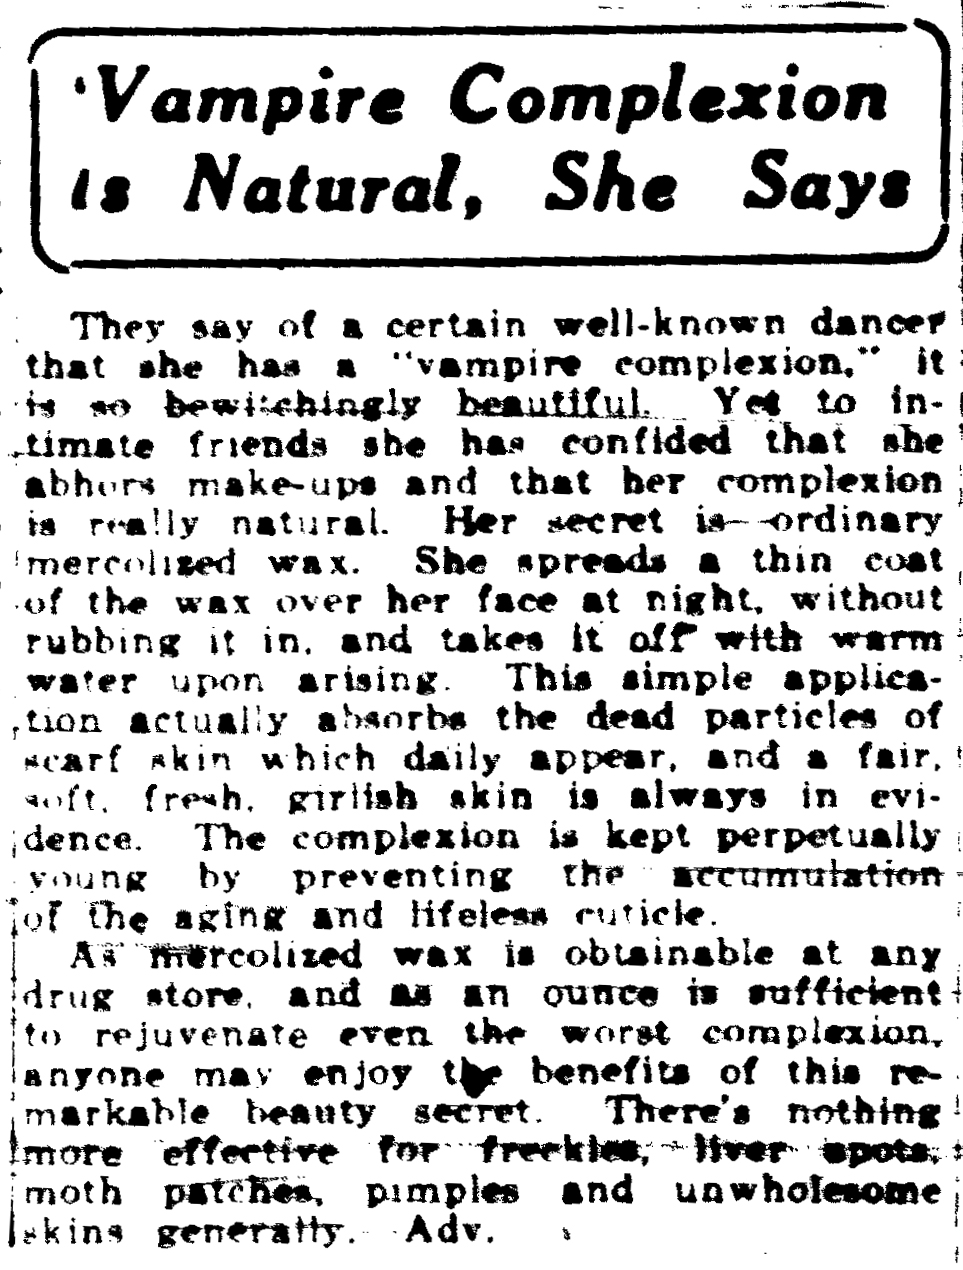 "Vampire Complexion is Natural, She Says," Dayton Daily News, 27 April 1922, page A28.